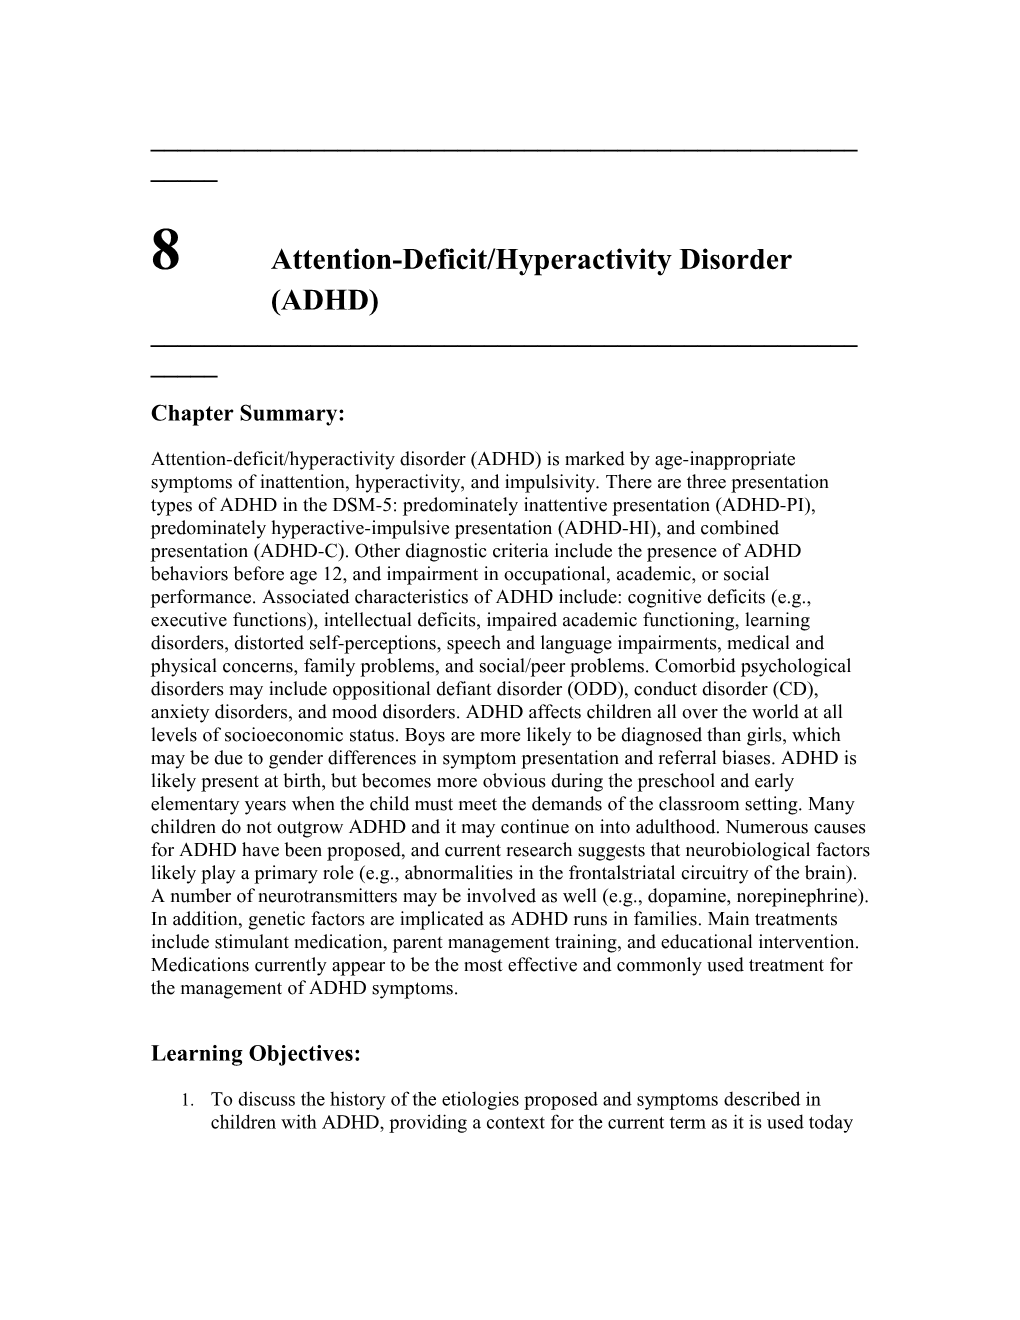 8Attention-Deficit/Hyperactivity Disorder (ADHD)